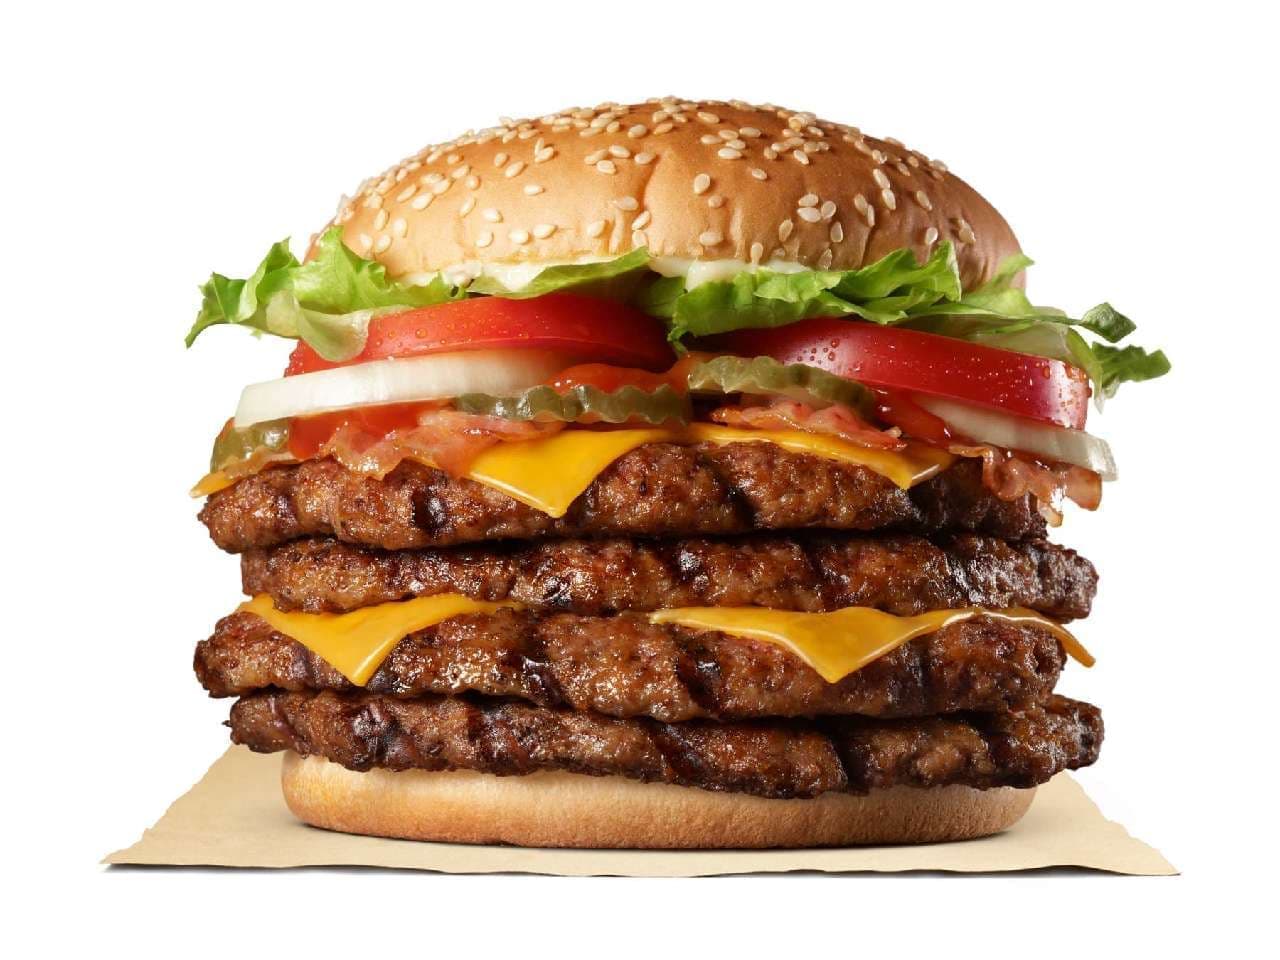 "Extreme Super One Pound Beef Burger" with "4 pieces of meat without buns" for Burger King